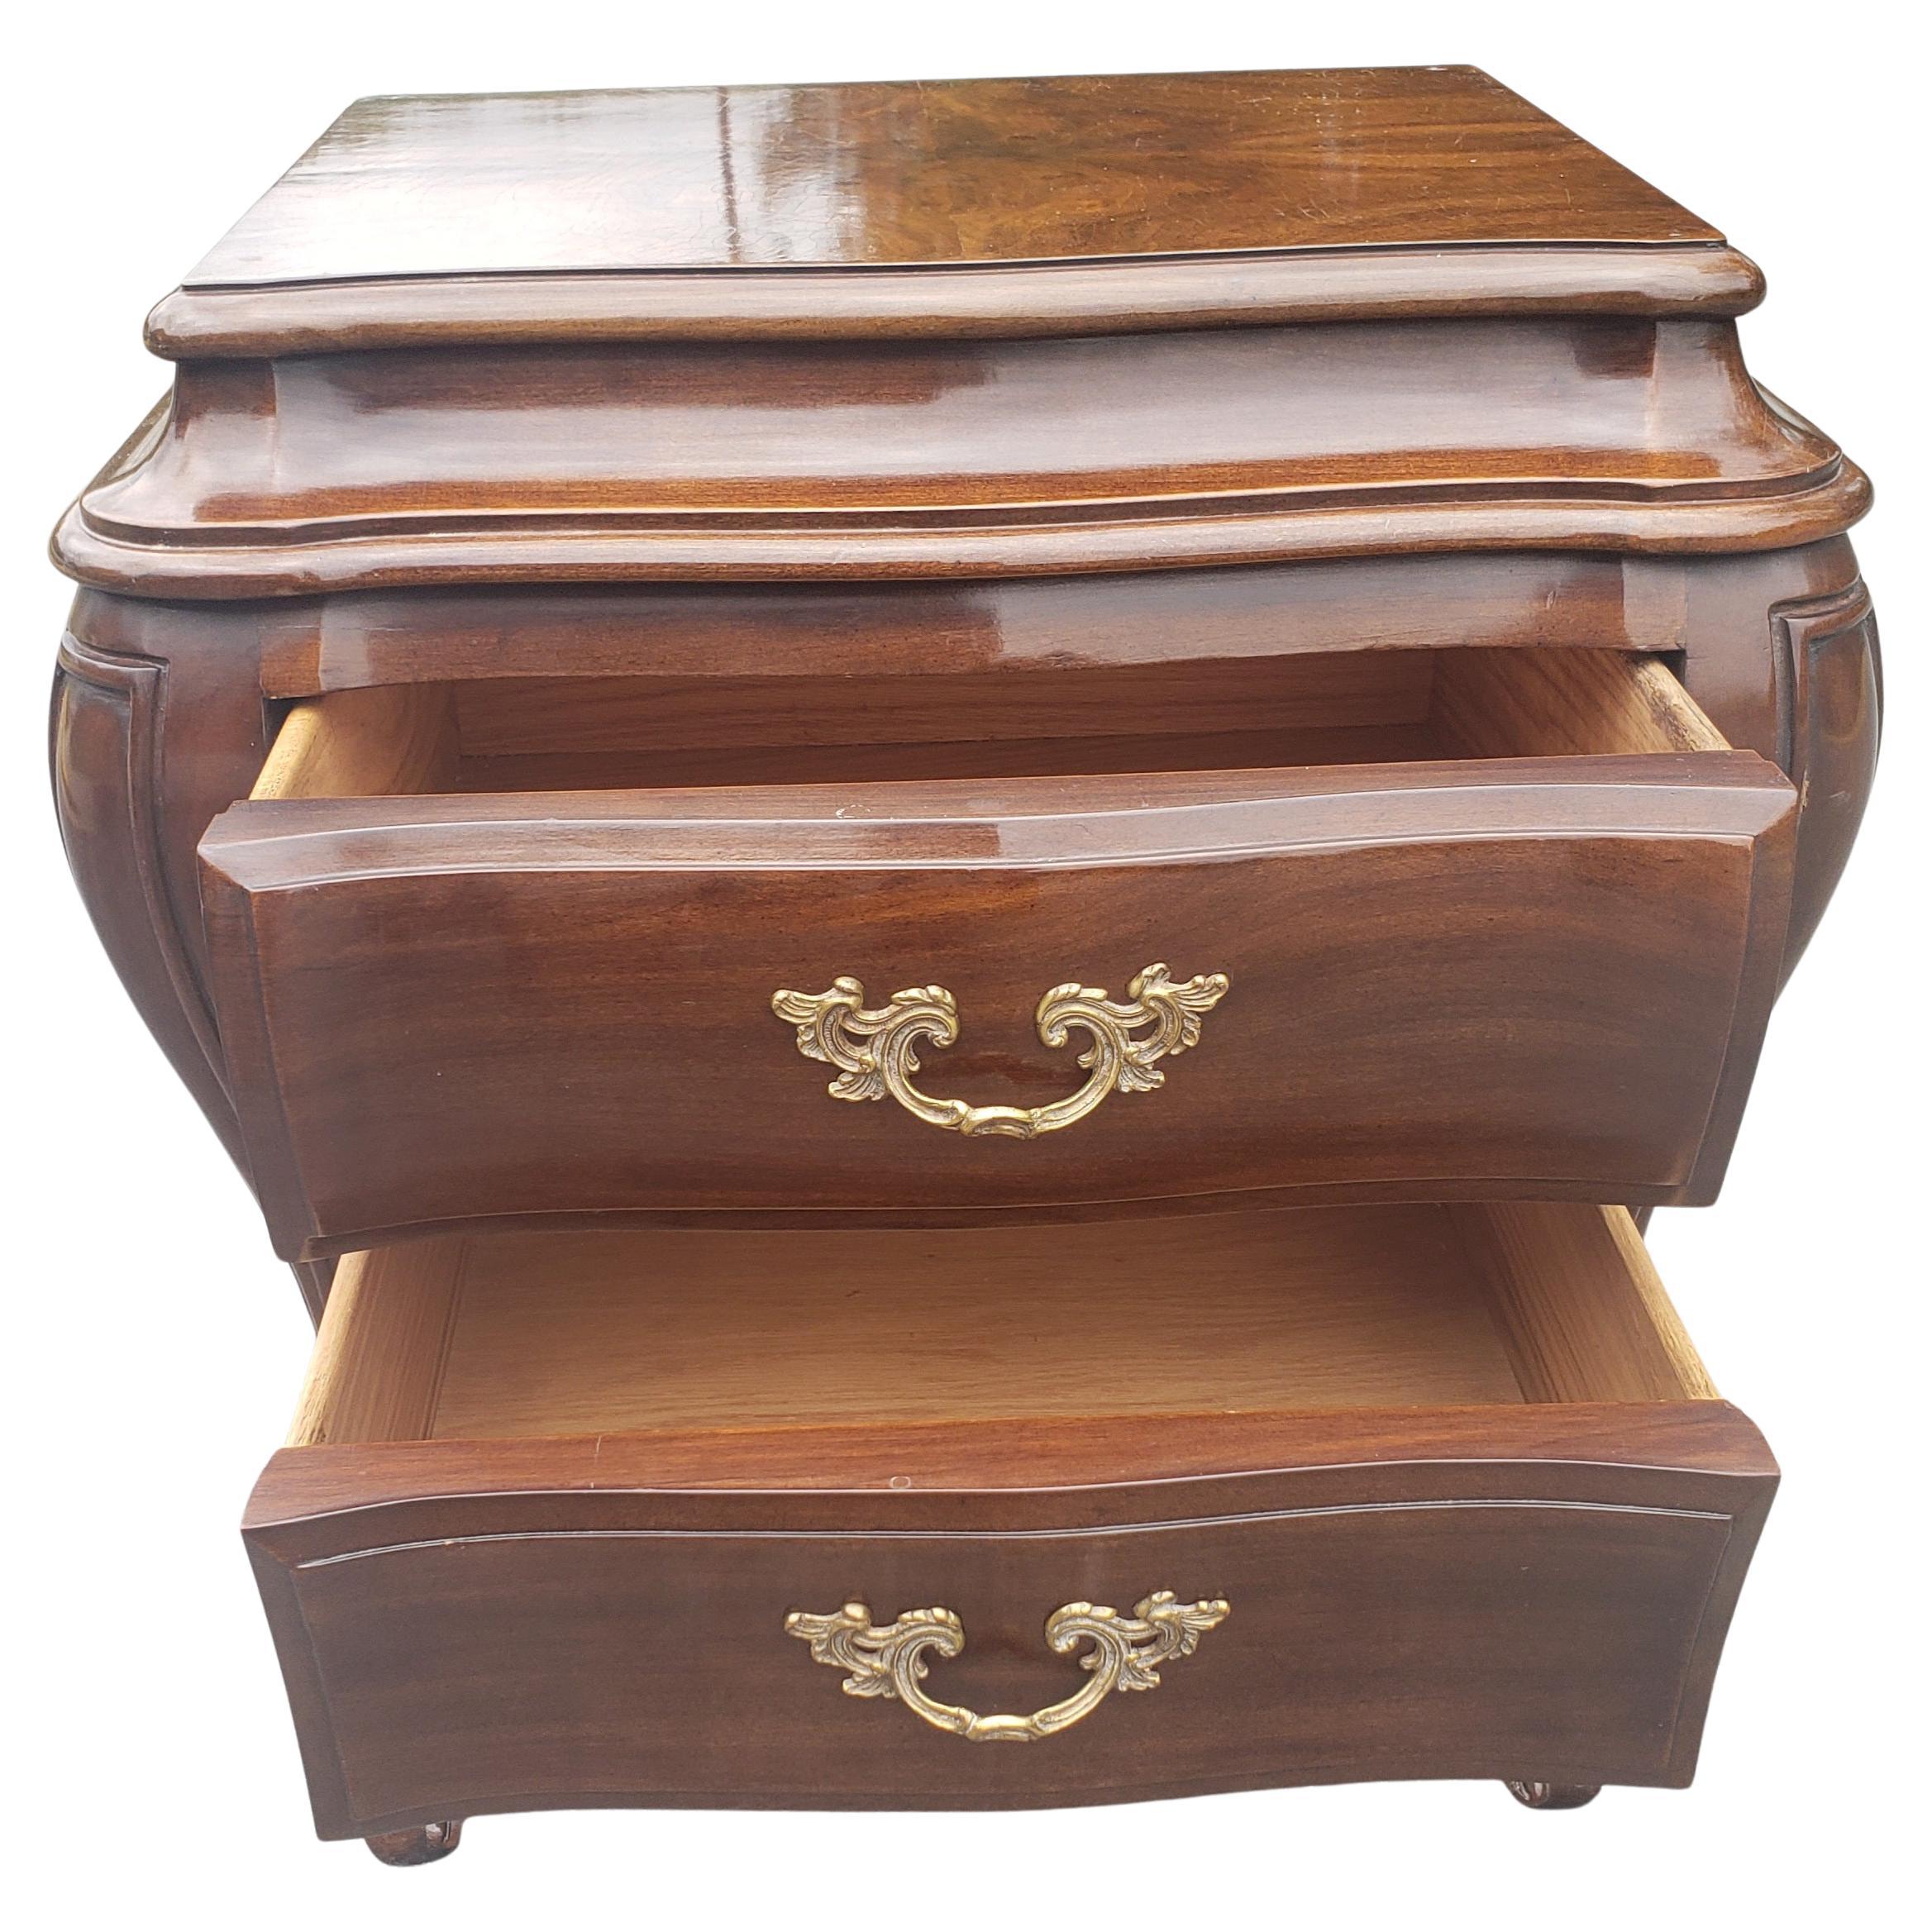 Karges Furniture Louis XVI Mahogany Bombe Nightstands Commodes, a Pair For Sale 1